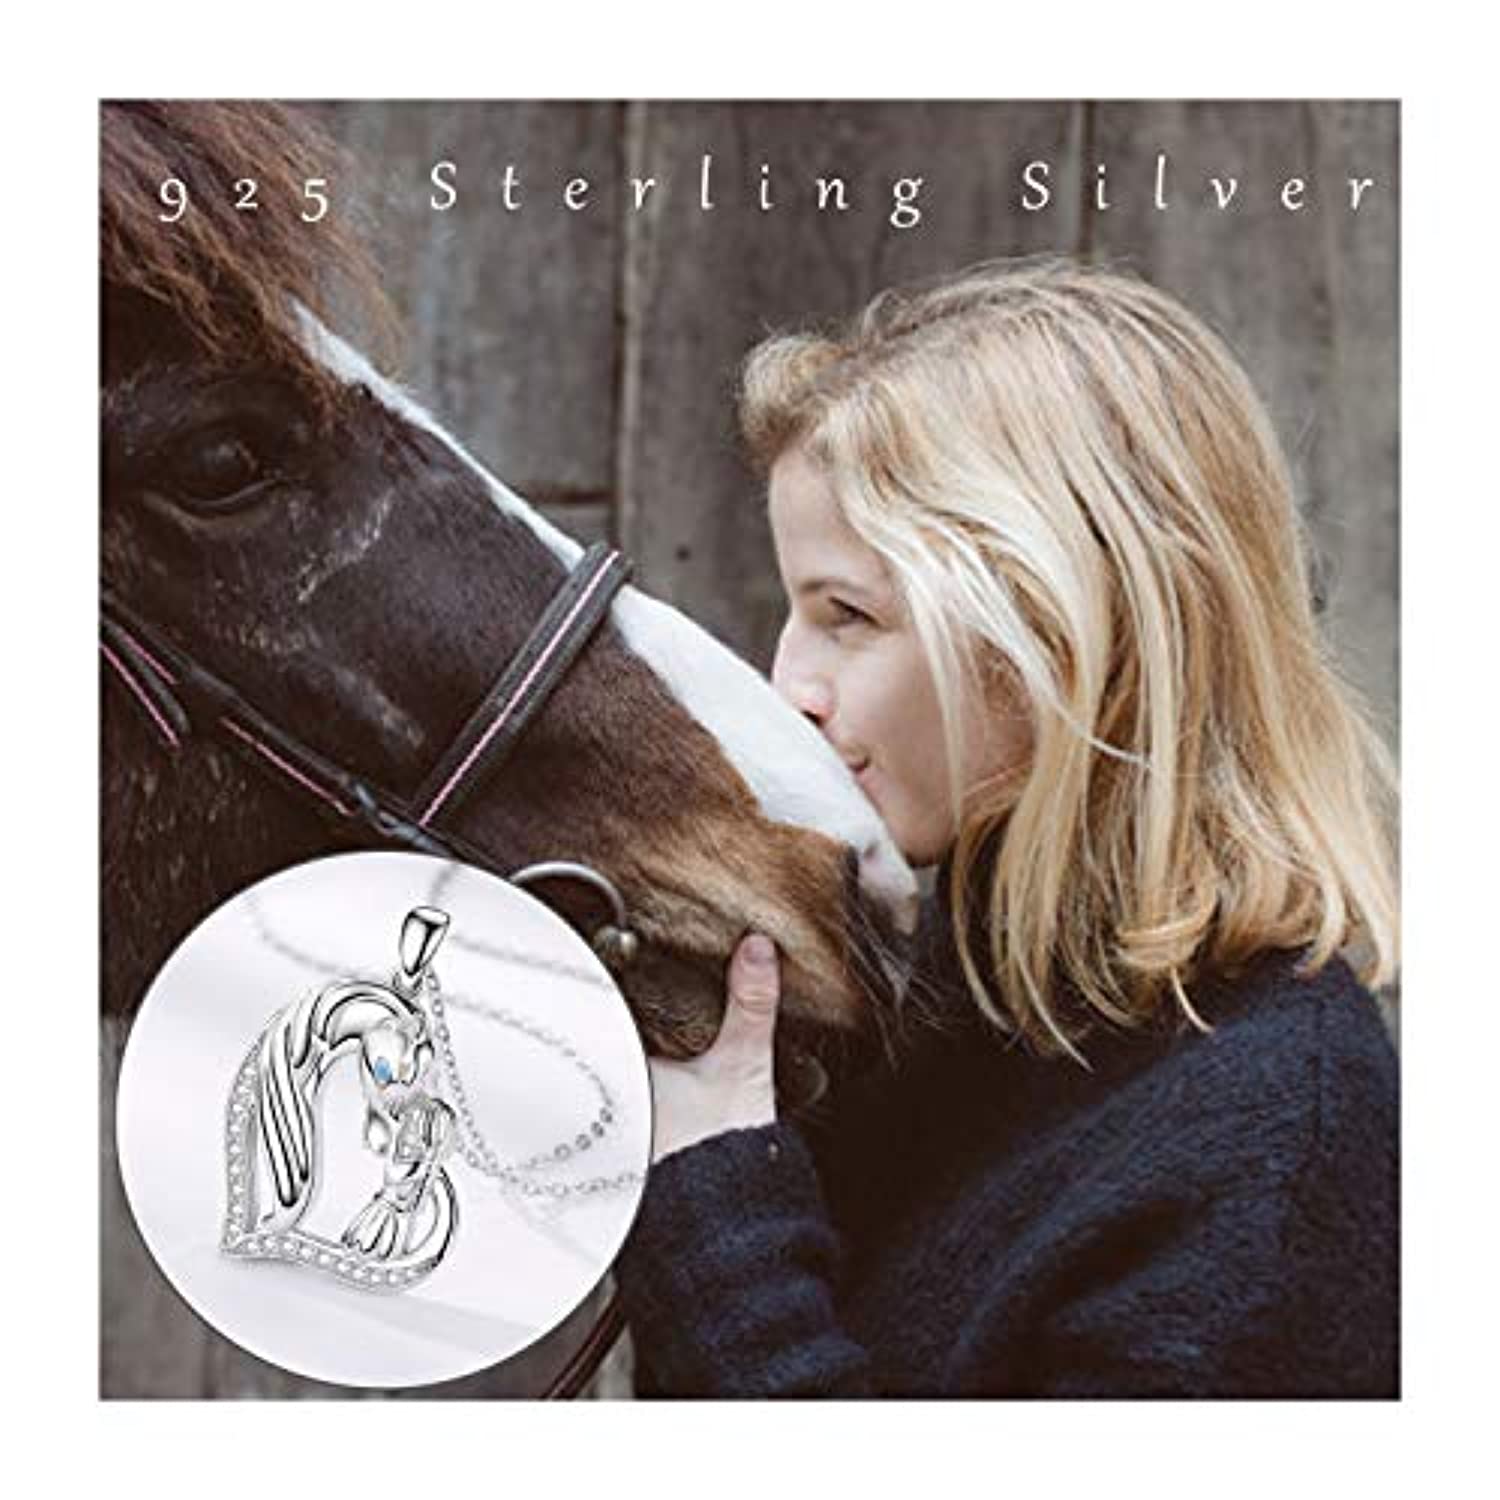  Horse Gifts for Girls, Horse Necklaces for Girls Horse Gifts  Horse Jewelry Horse Necklace Horse Gifts for Girls Jewelry Girls Necklaces  Horse Jewelry for Teen Girl Gifts Horse Gifts for Women